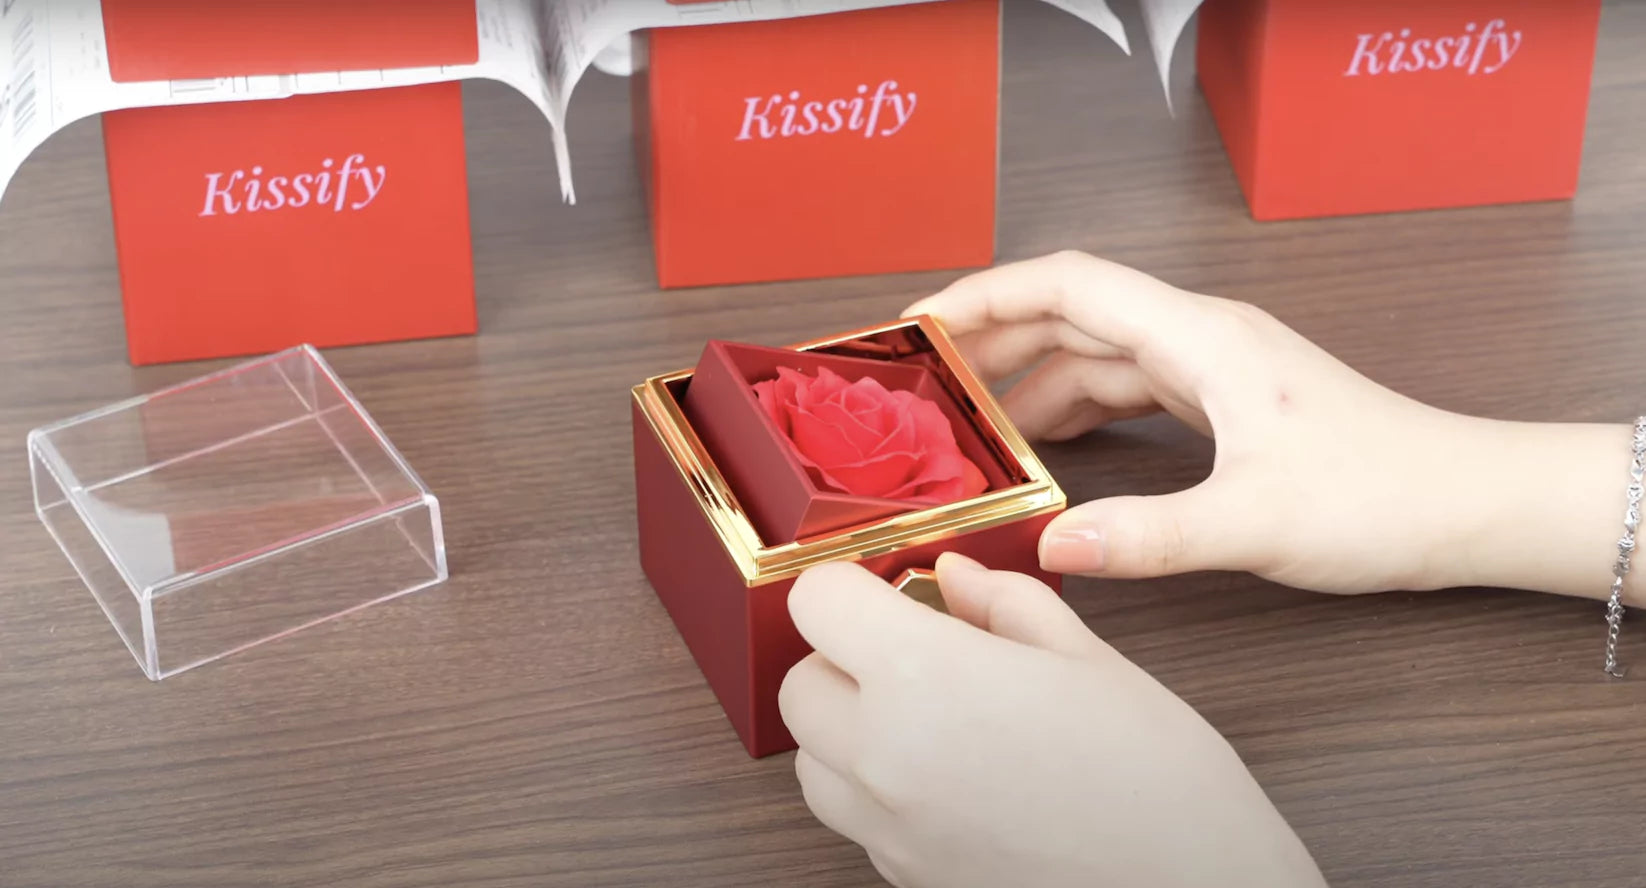 Load video: Packing the Eternal Rose Box with Hidden Hug Necklace | Perfect Gift for Loved Ones | Kissify